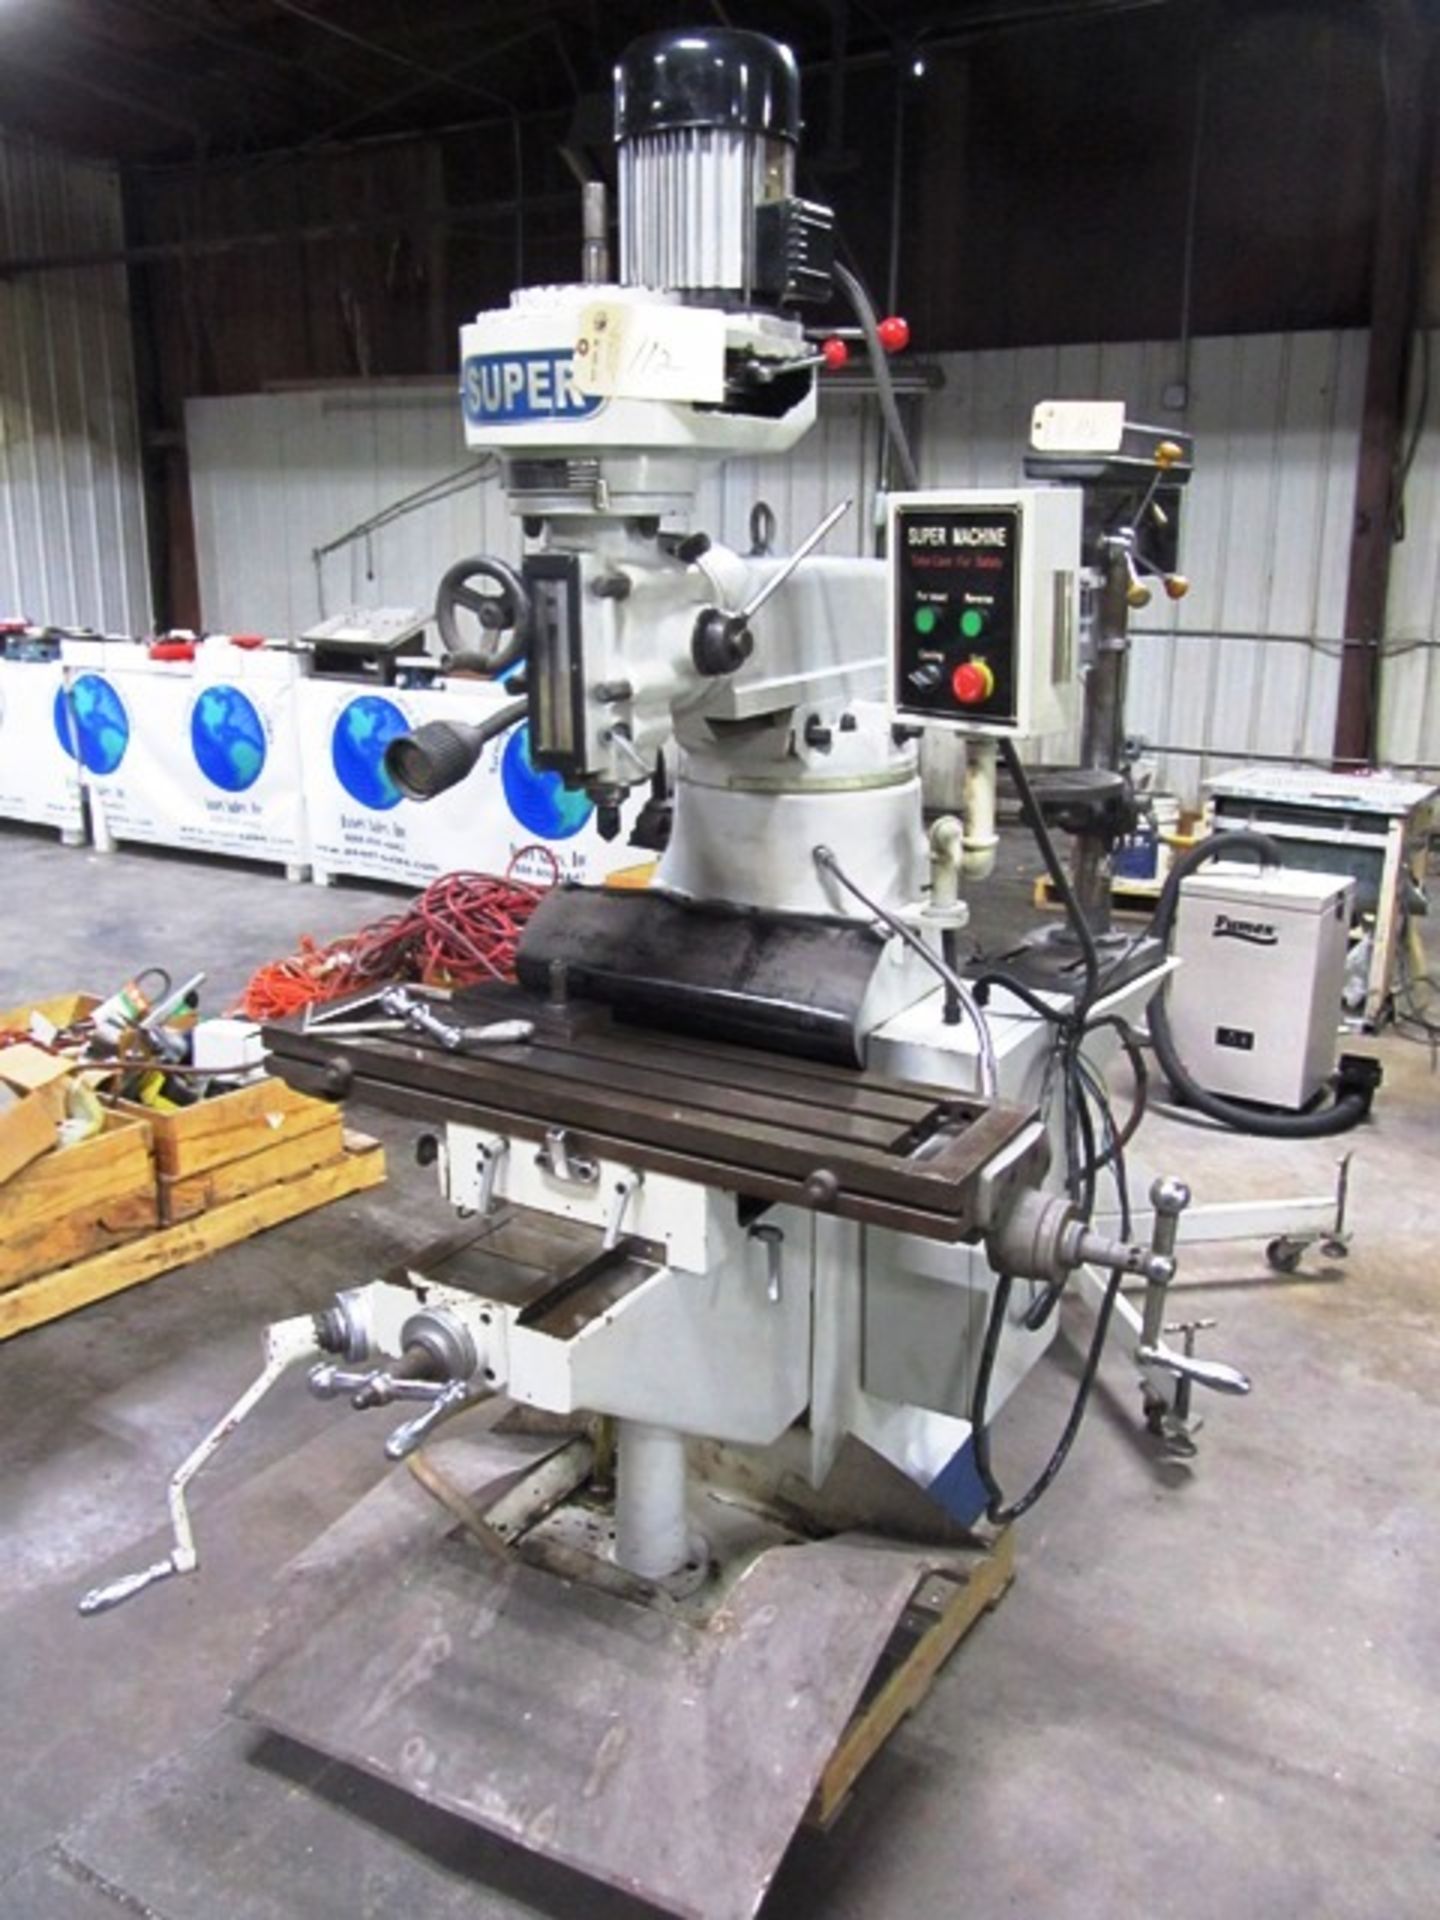 Super Machine 9'' x 36'' Vertical Milling Machine with 9'' x 36'' Worktable, R8 Taper, Spindle